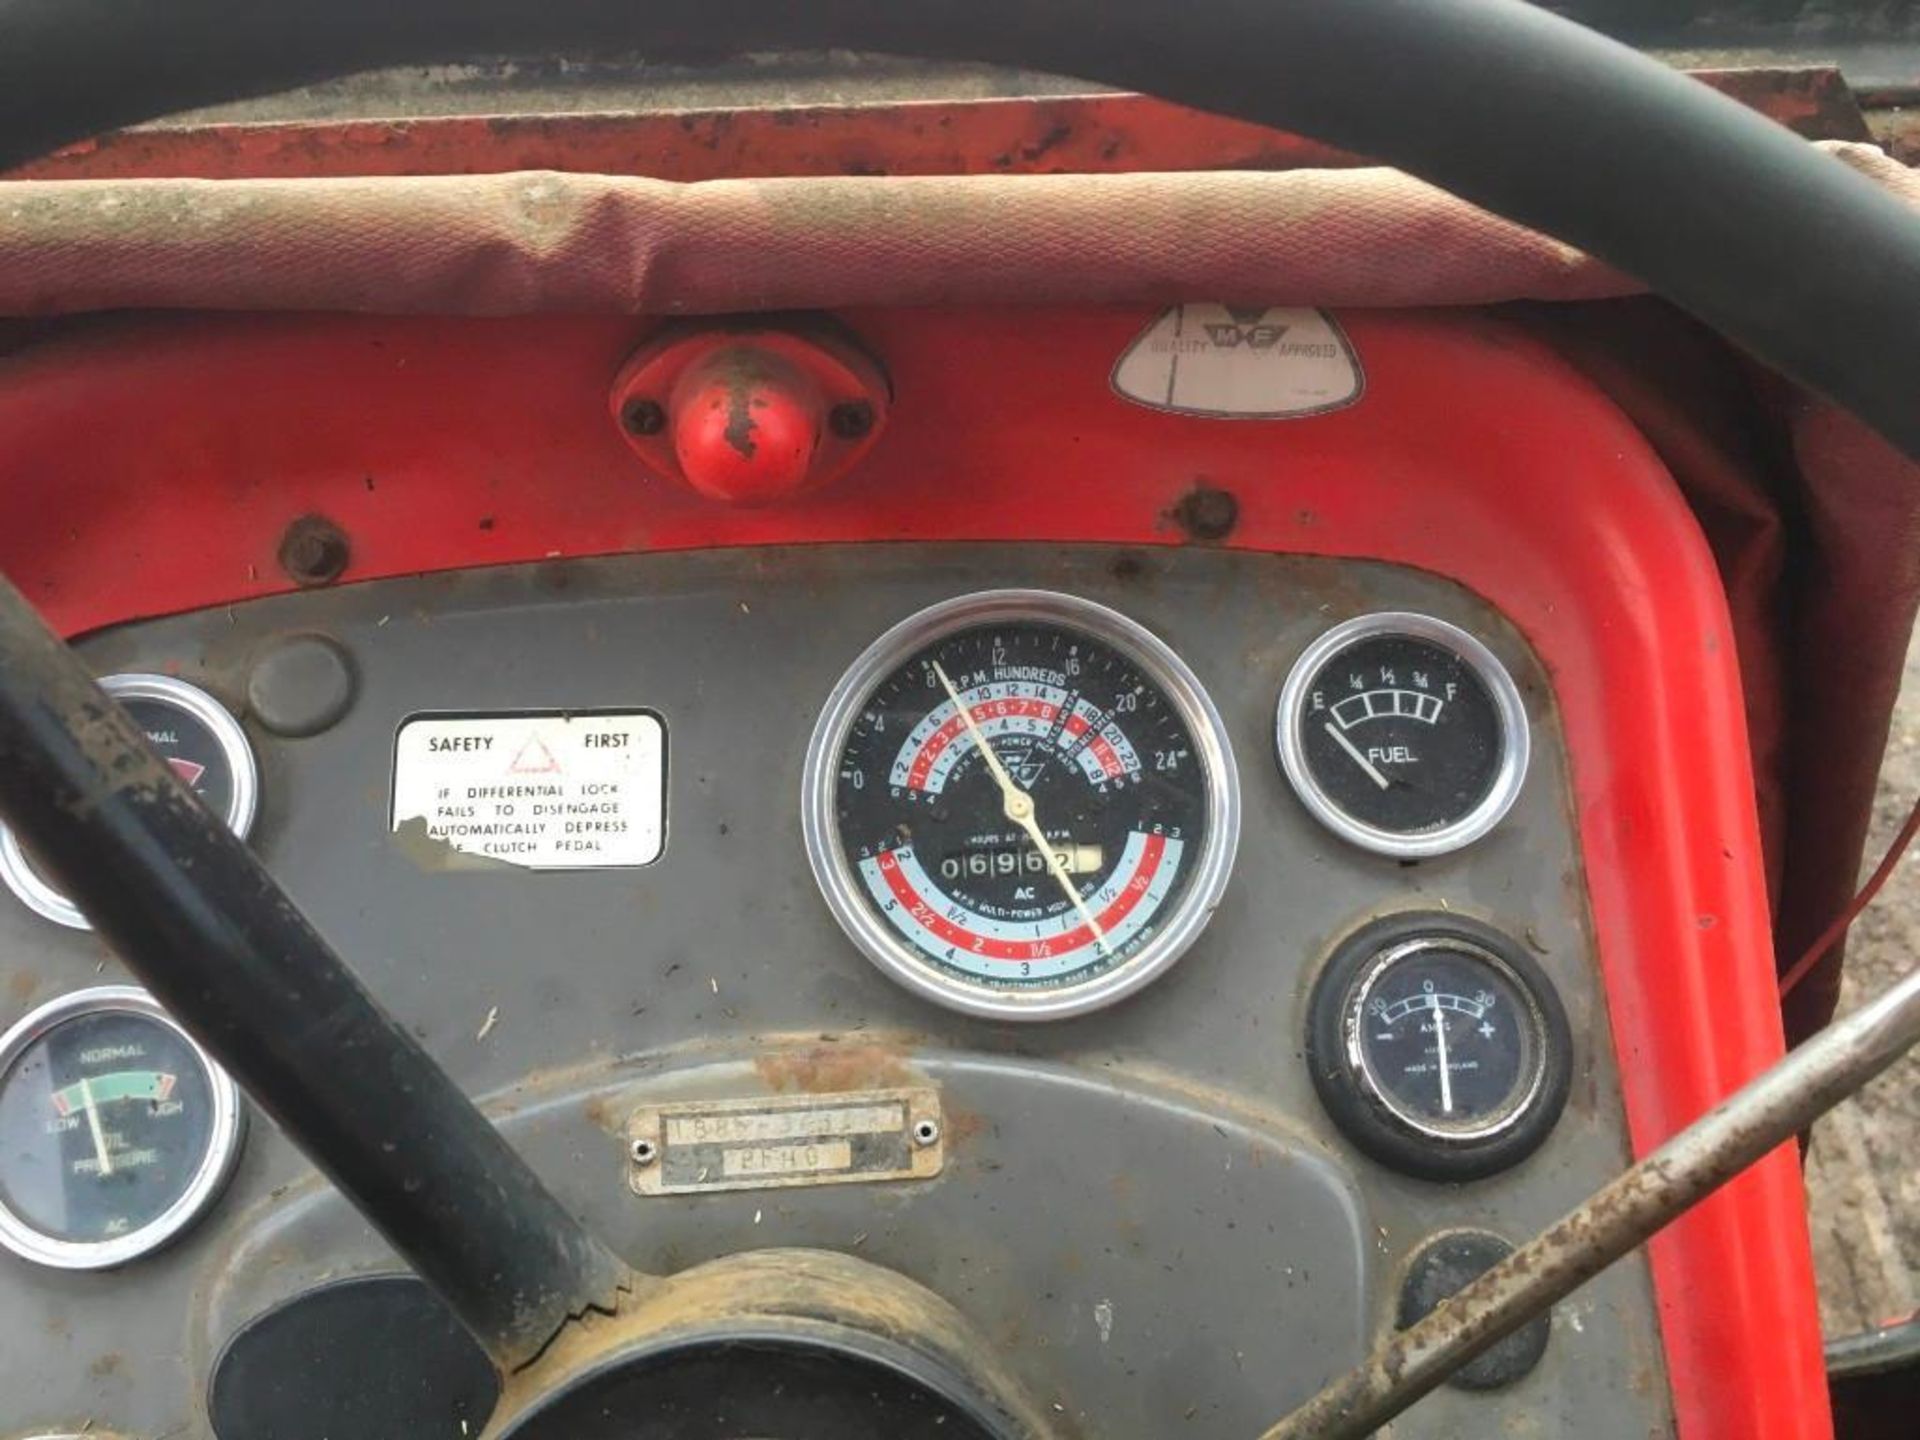 1974 Massey Ferguson 188 MultiPower tractor, 3 spool valves, rear link arms and pickup hitch, benefi - Image 19 of 21